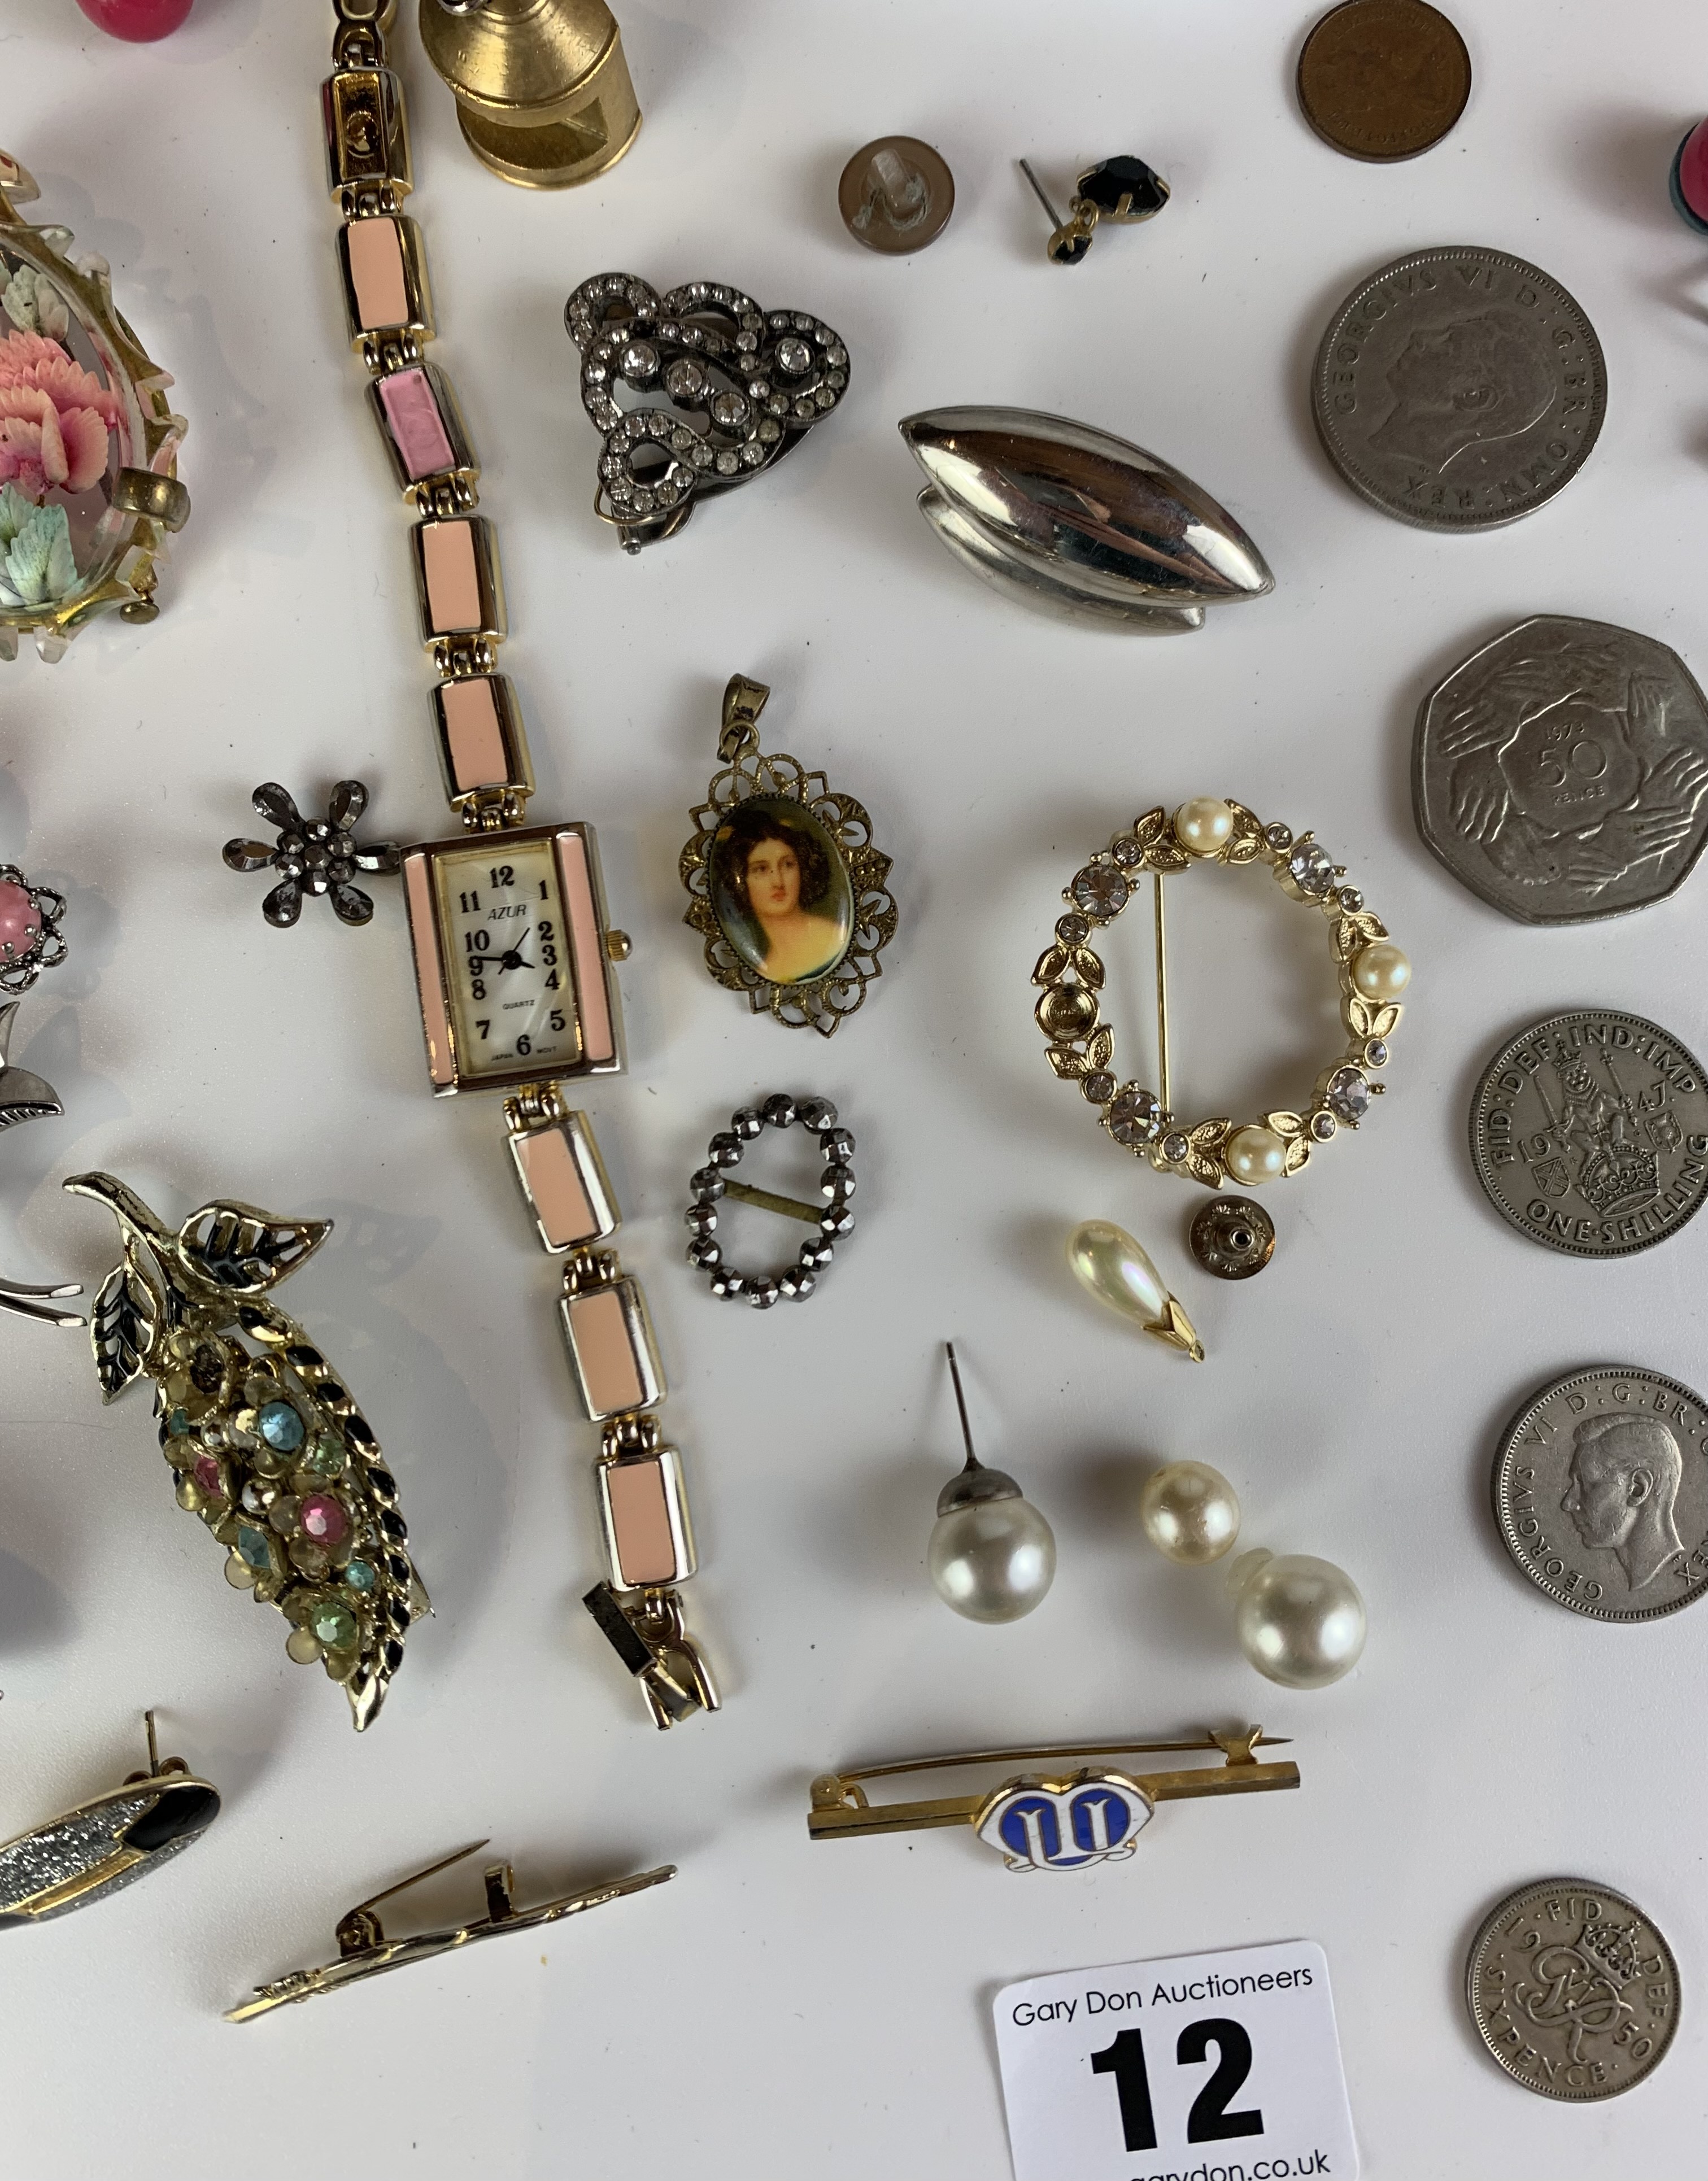 Dress jewellery including brooches, earrings, rings, souvenir spoon, odd coins and Azur watch - Image 3 of 9